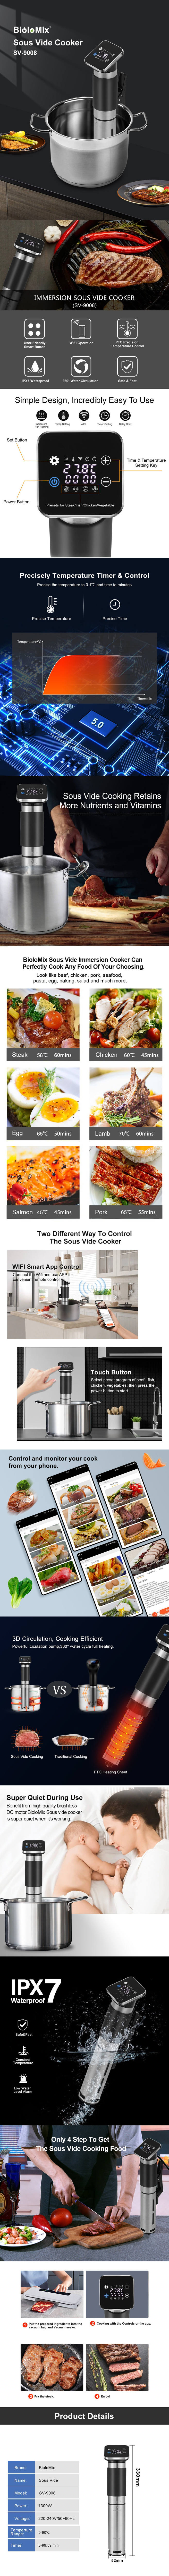 5th Generation WiFi Sous Vide Cooker IPX7